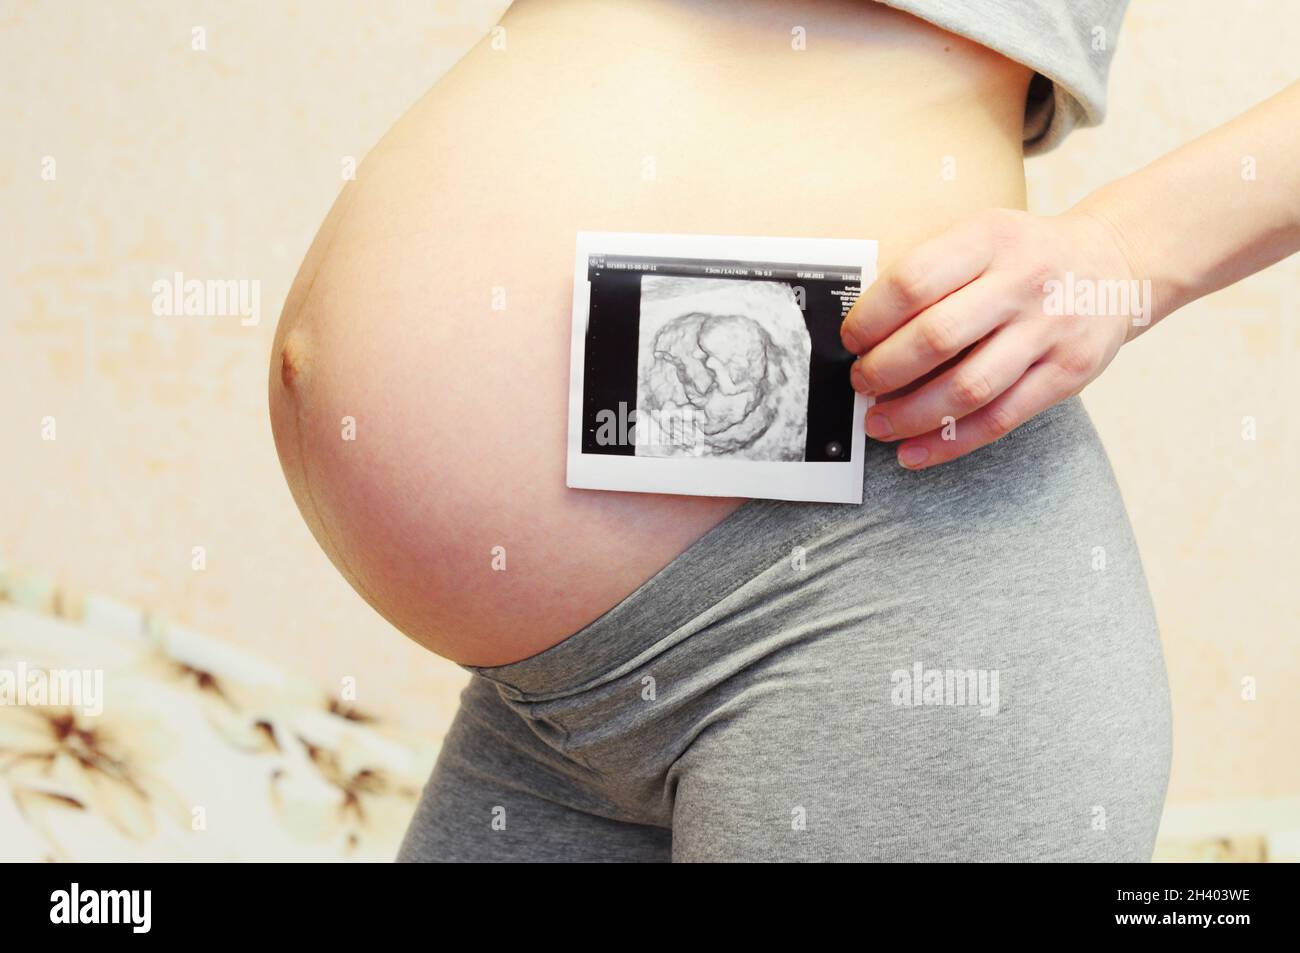 Pregnancy ultrasound scan. Pregnant woman holding ultrasound scan on ...